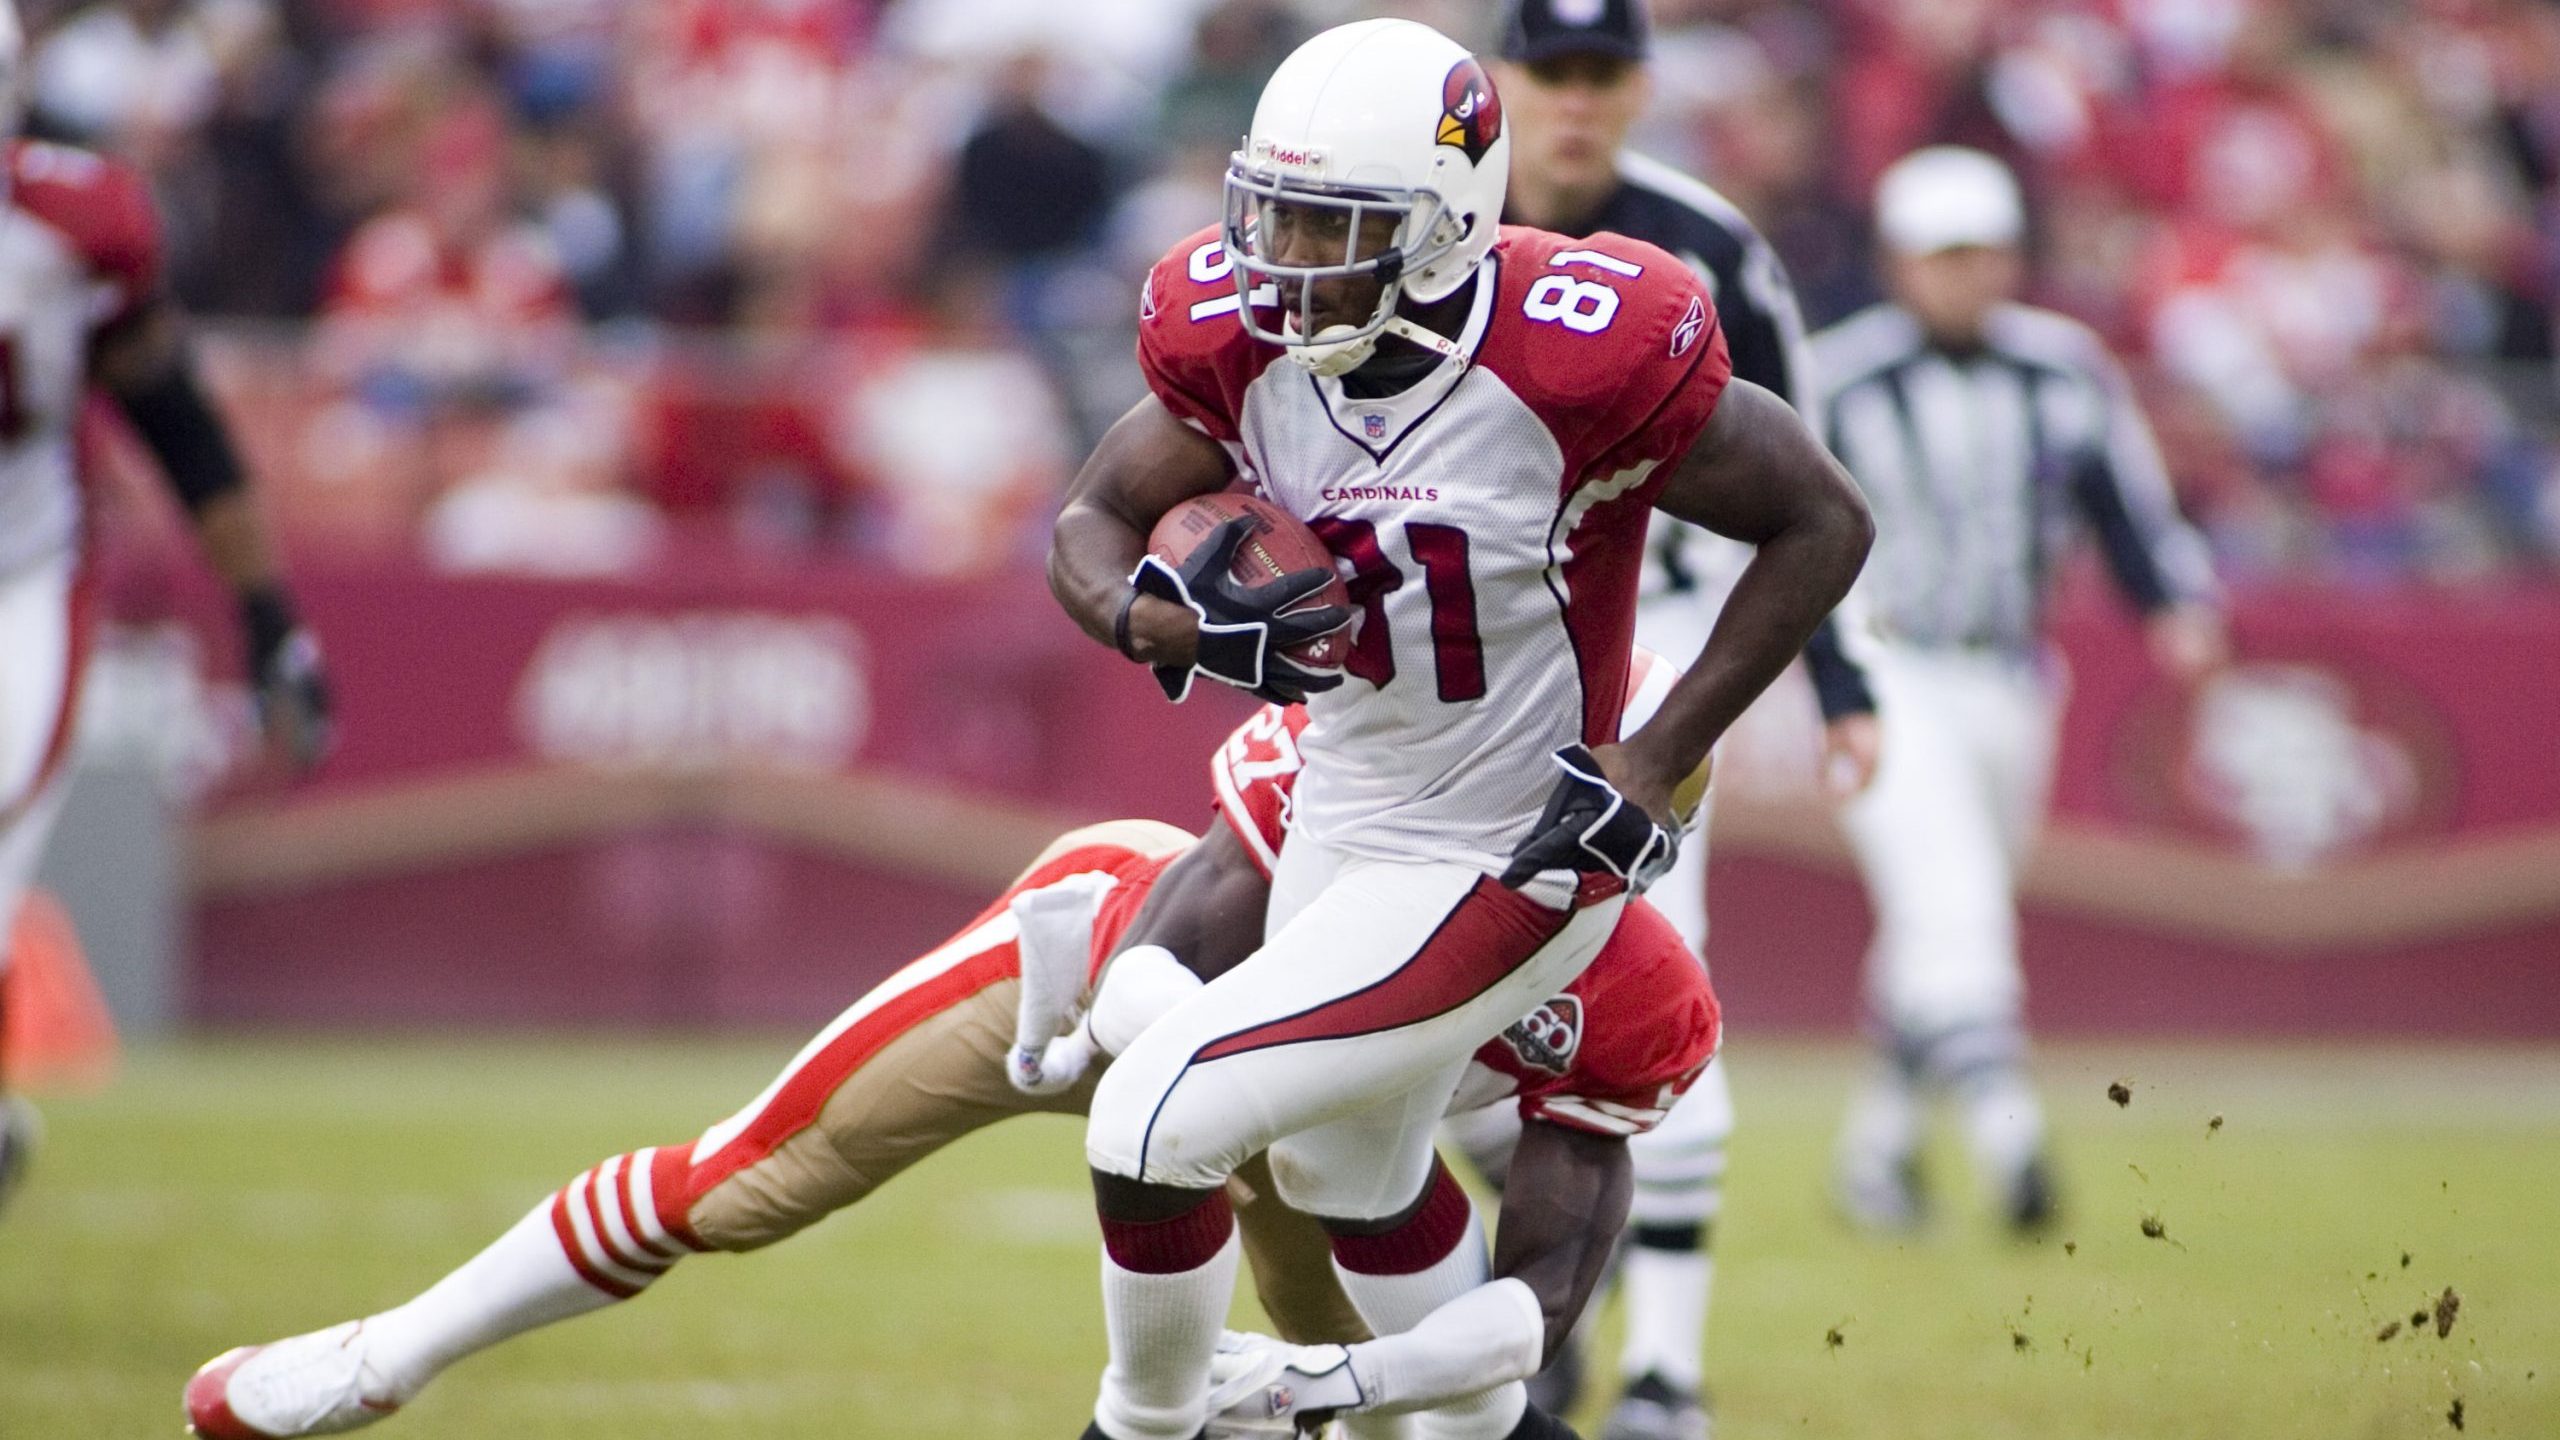 Anquan Boldin wide receiver for the Arizona Cardinals breaks a tackle by #27 Walt Harris in a game ...